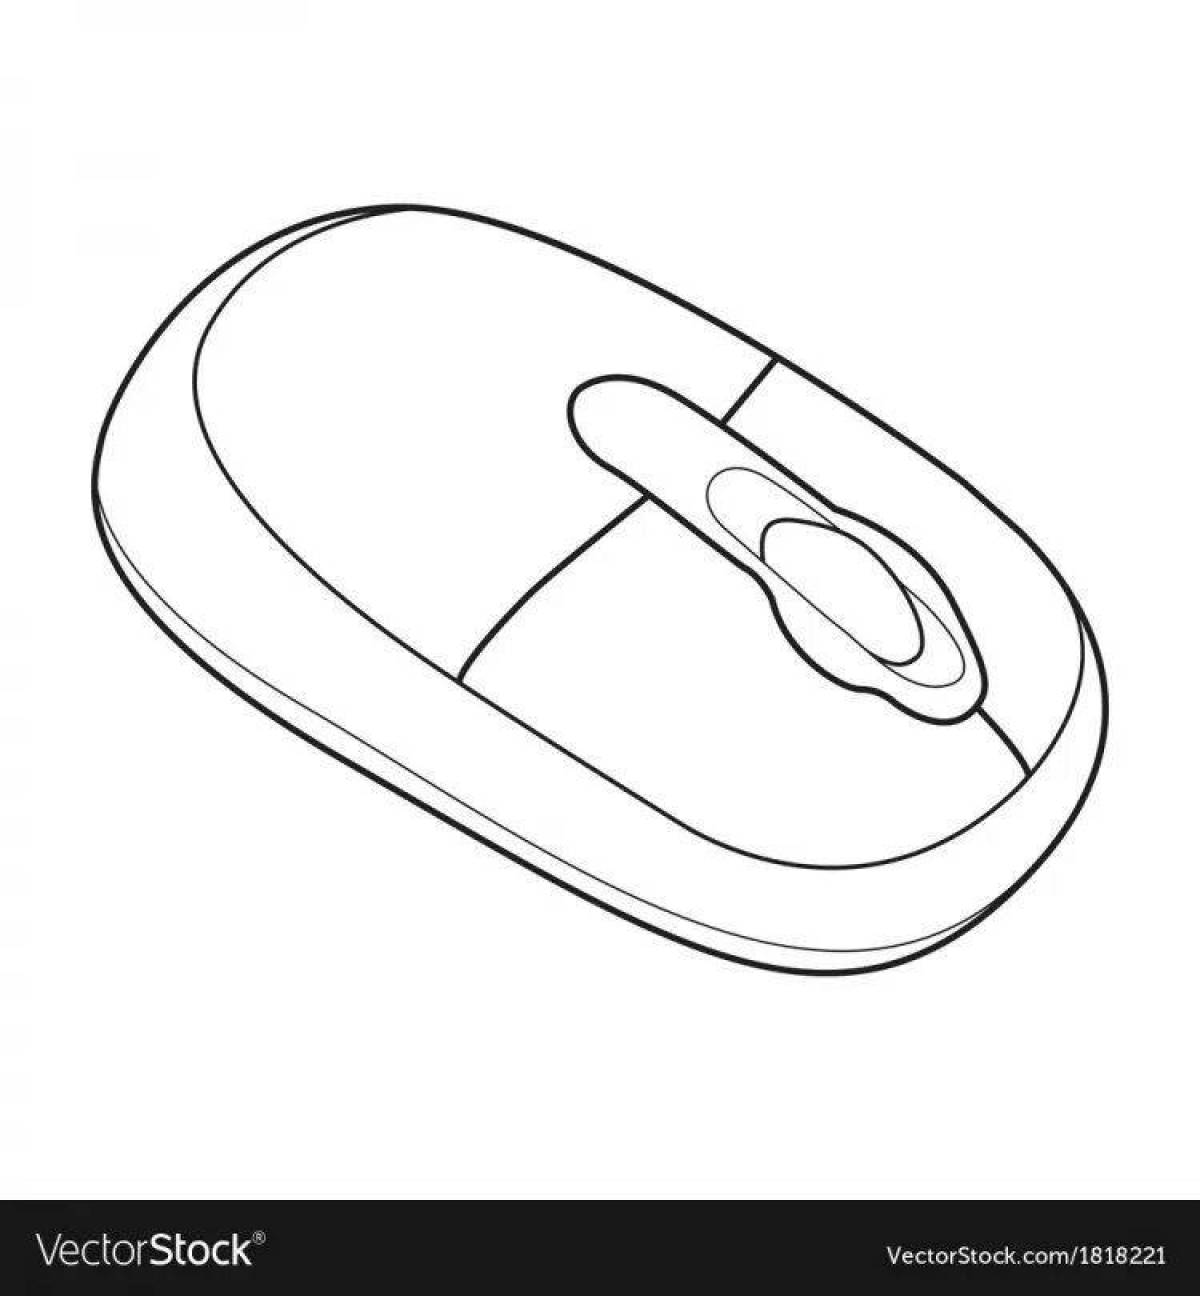 Computer mouse #11